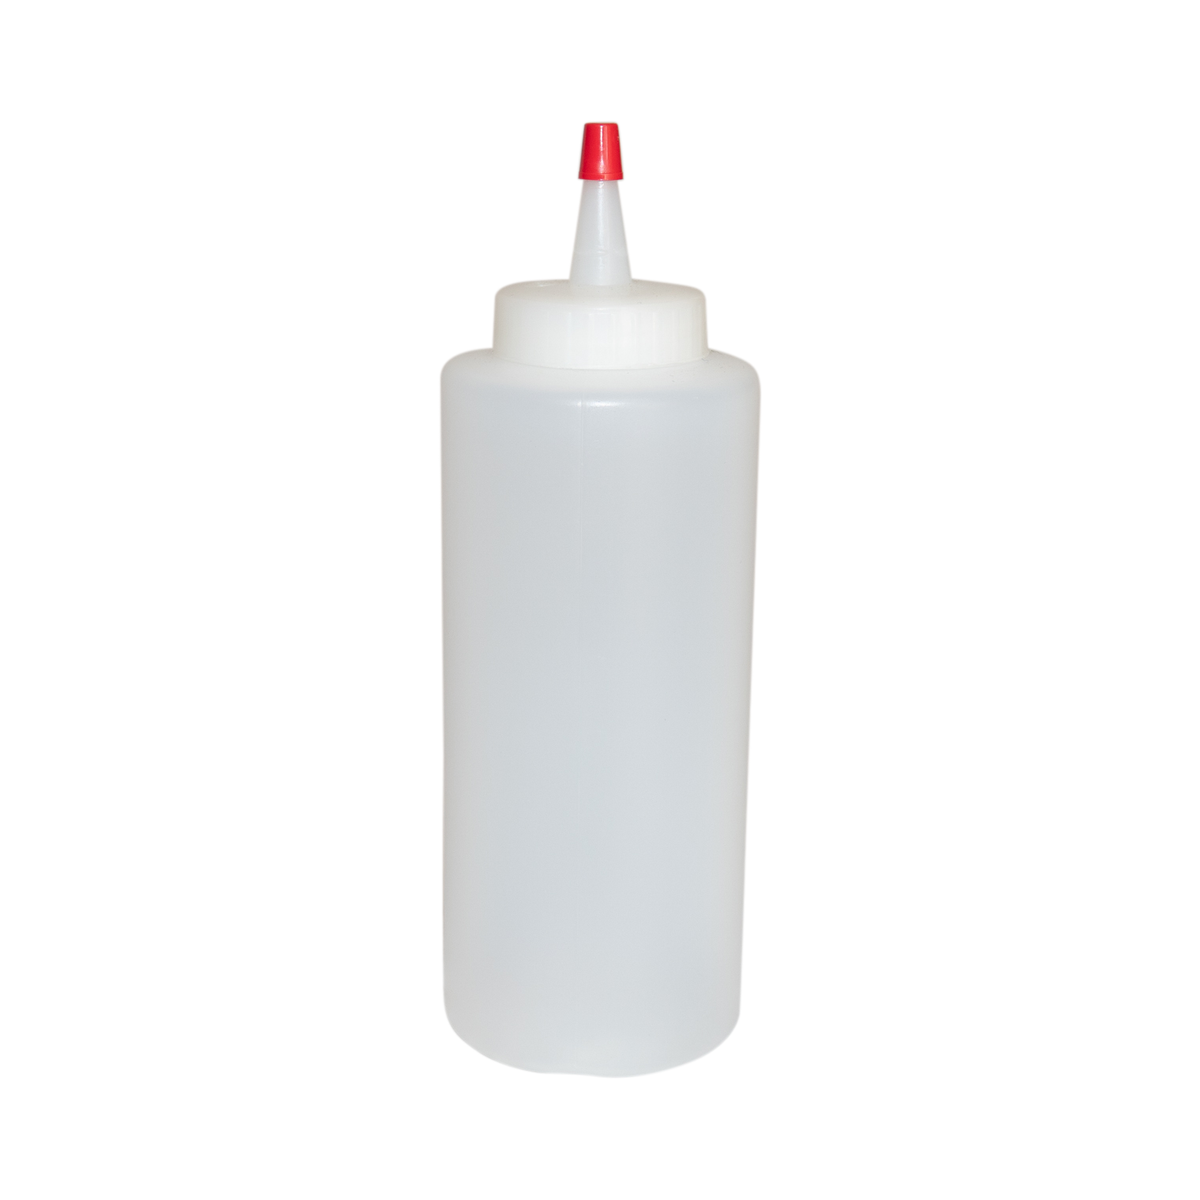 Plastic Detailer Squirt Bottle For Wax and Polishes